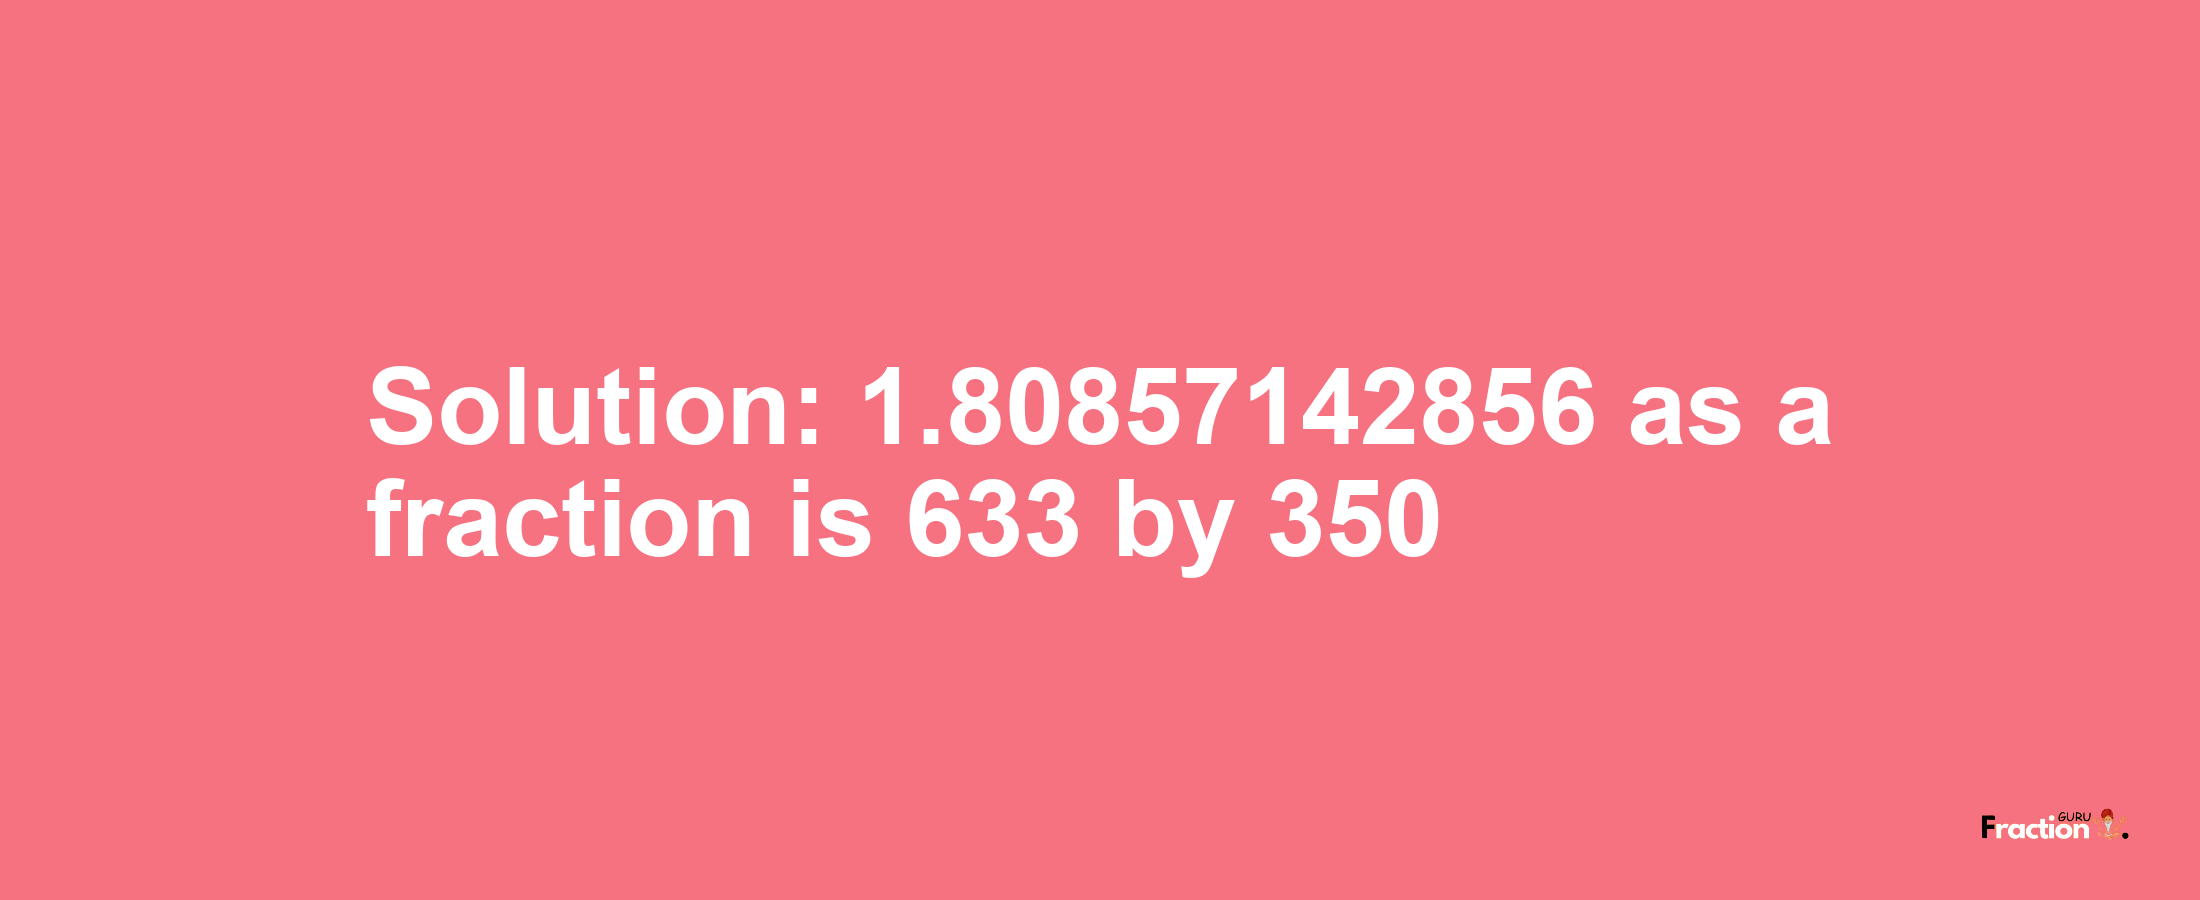 Solution:1.80857142856 as a fraction is 633/350